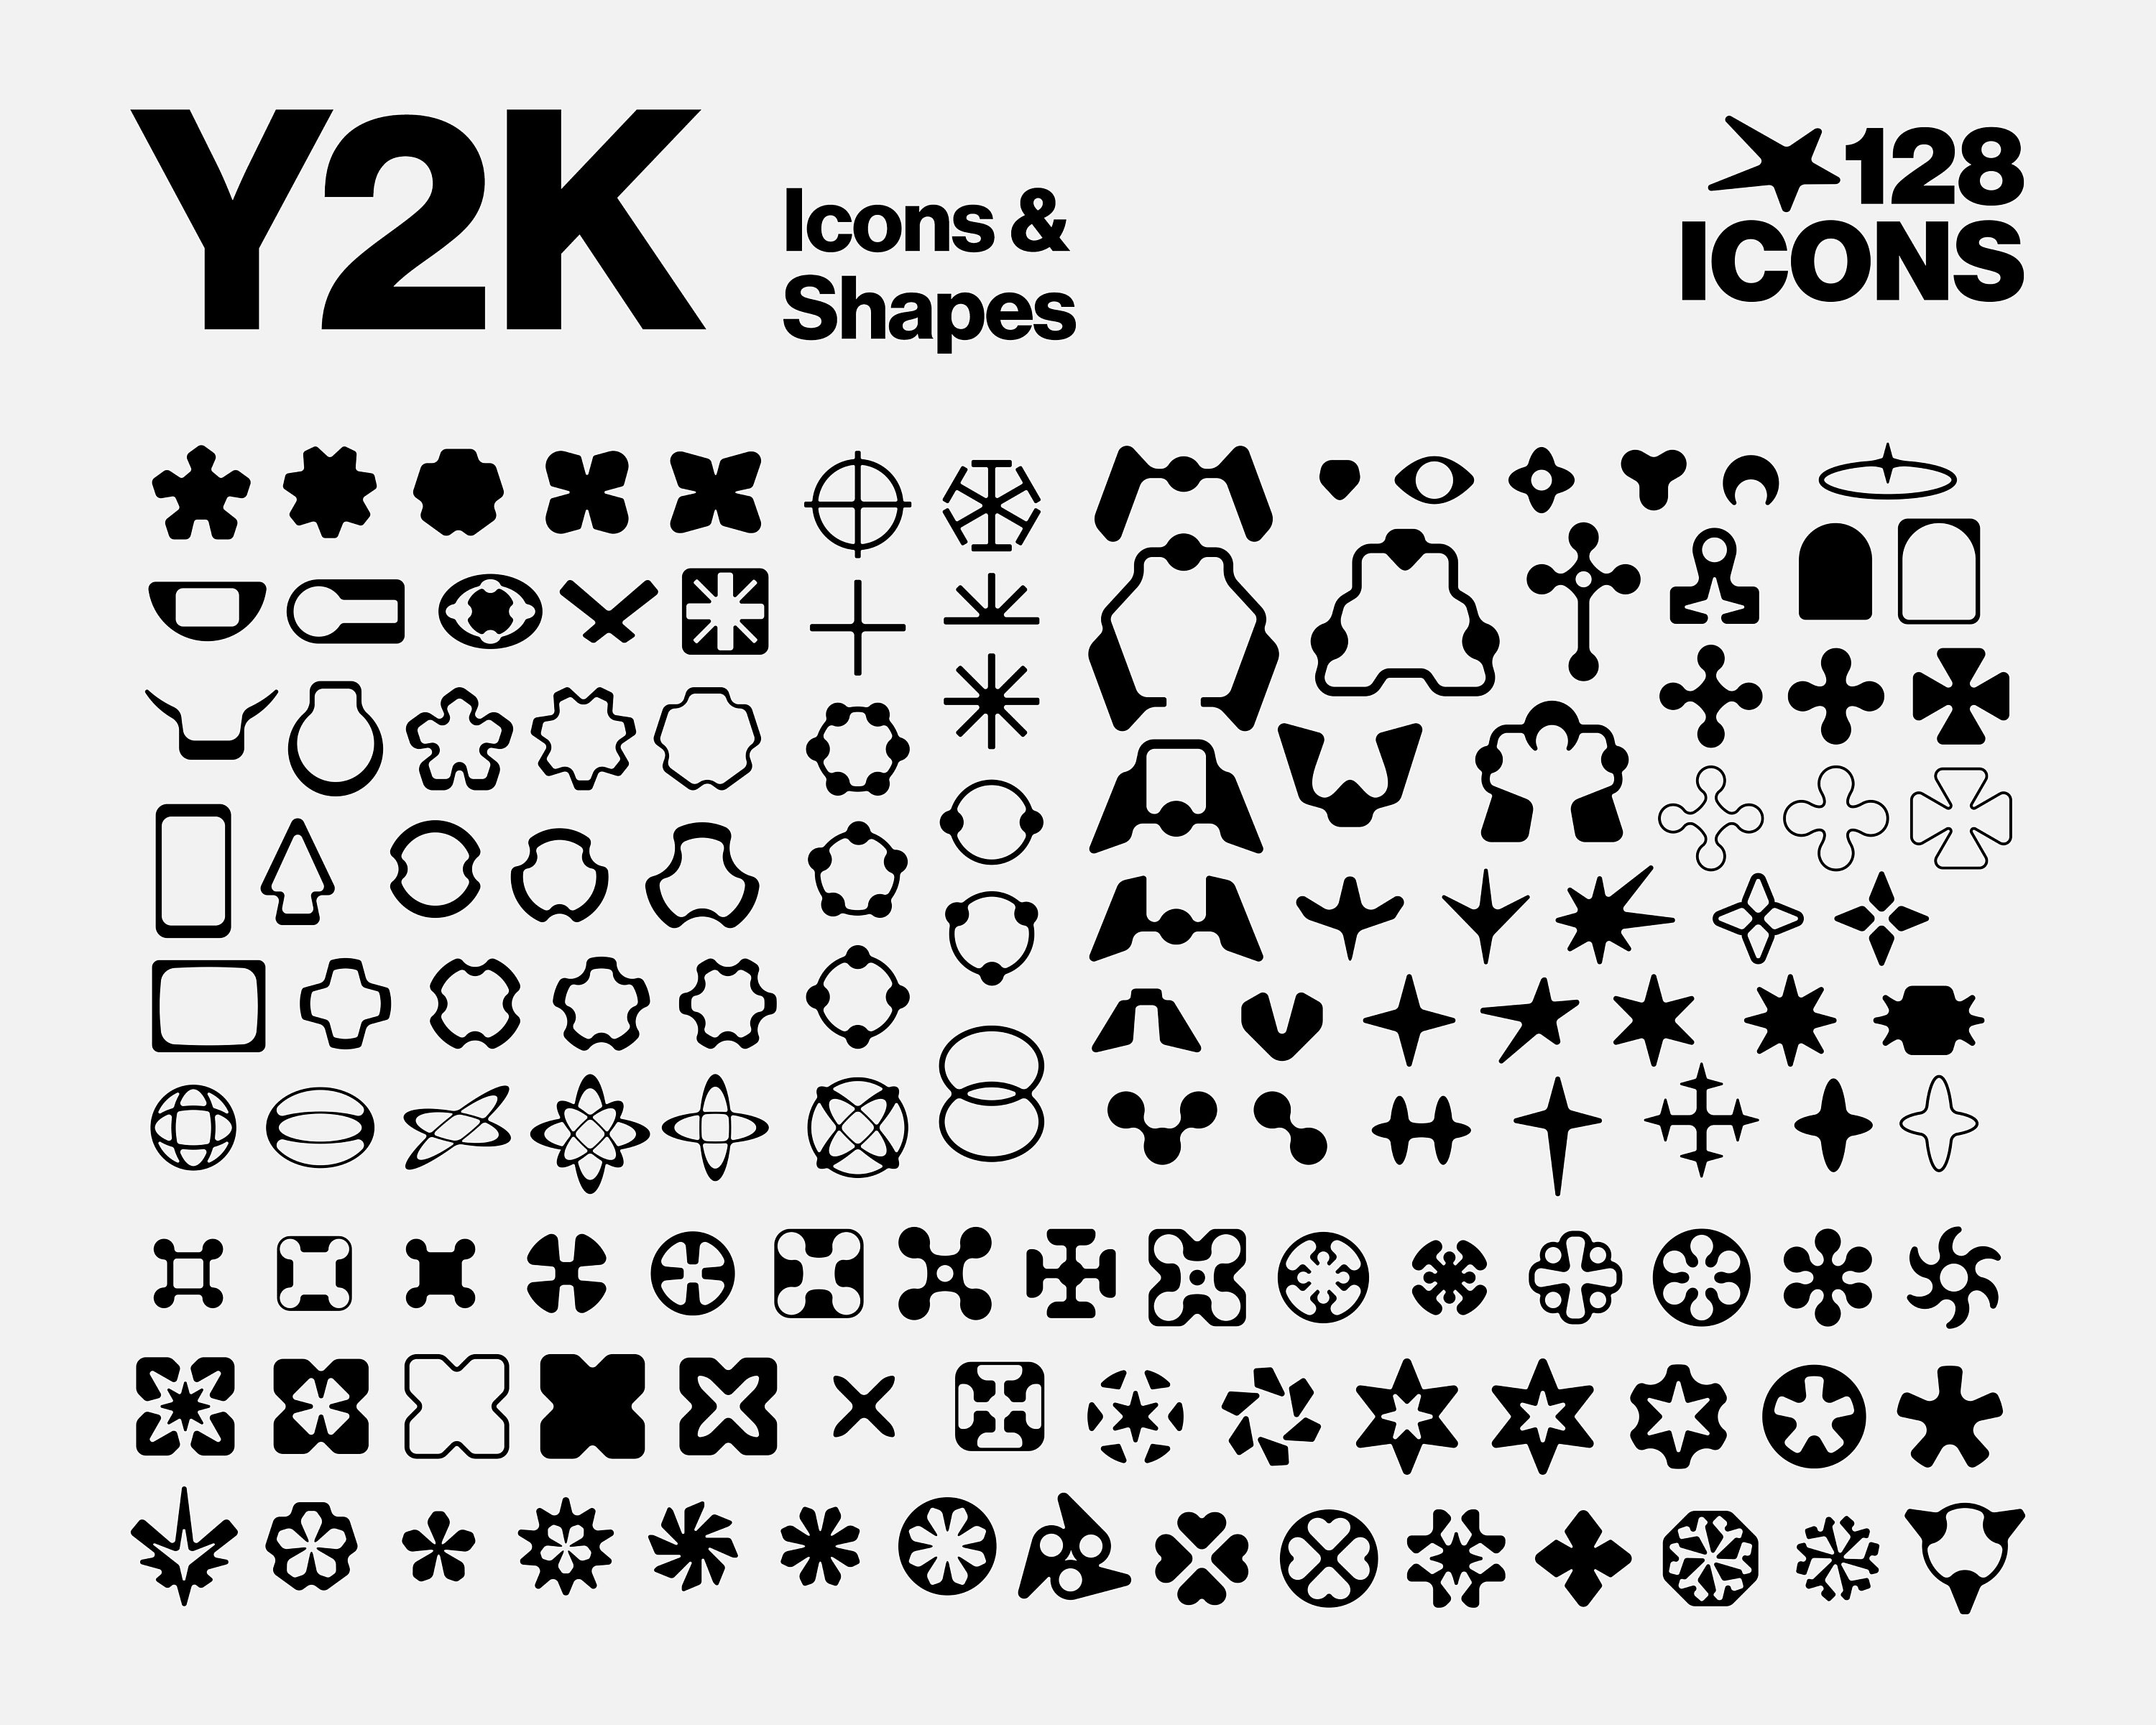 Y2K Streetwear Aesthetic Icons & Symbols 25 Assets for Logos 